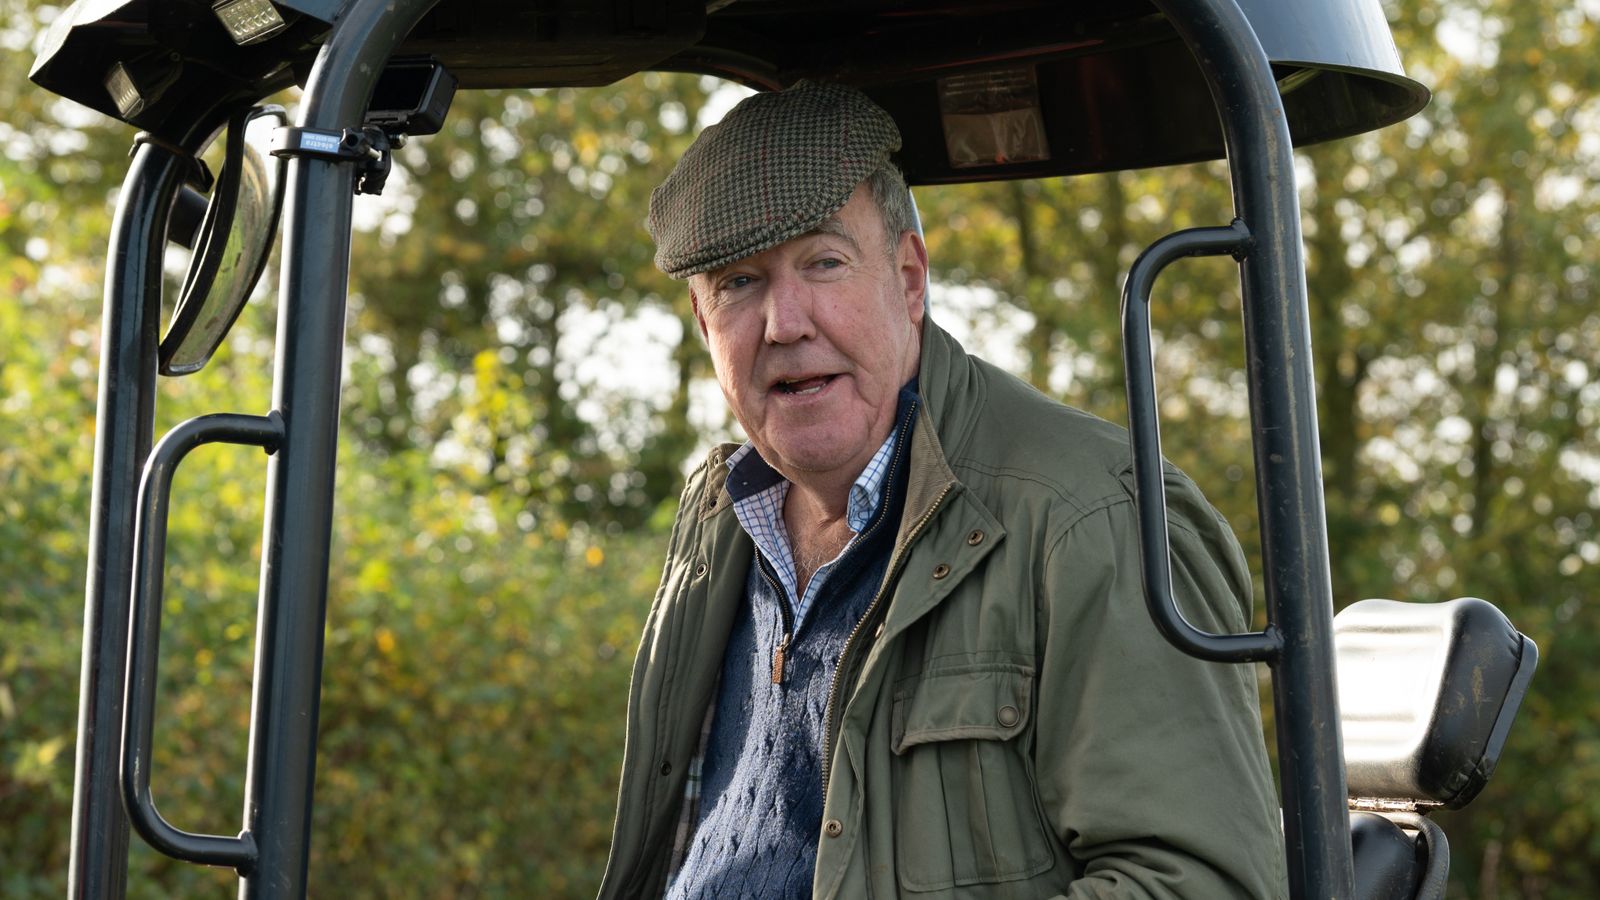 Jeremy Clarkson: Amazon 'likely to part ways' with presenter over Meghan column row